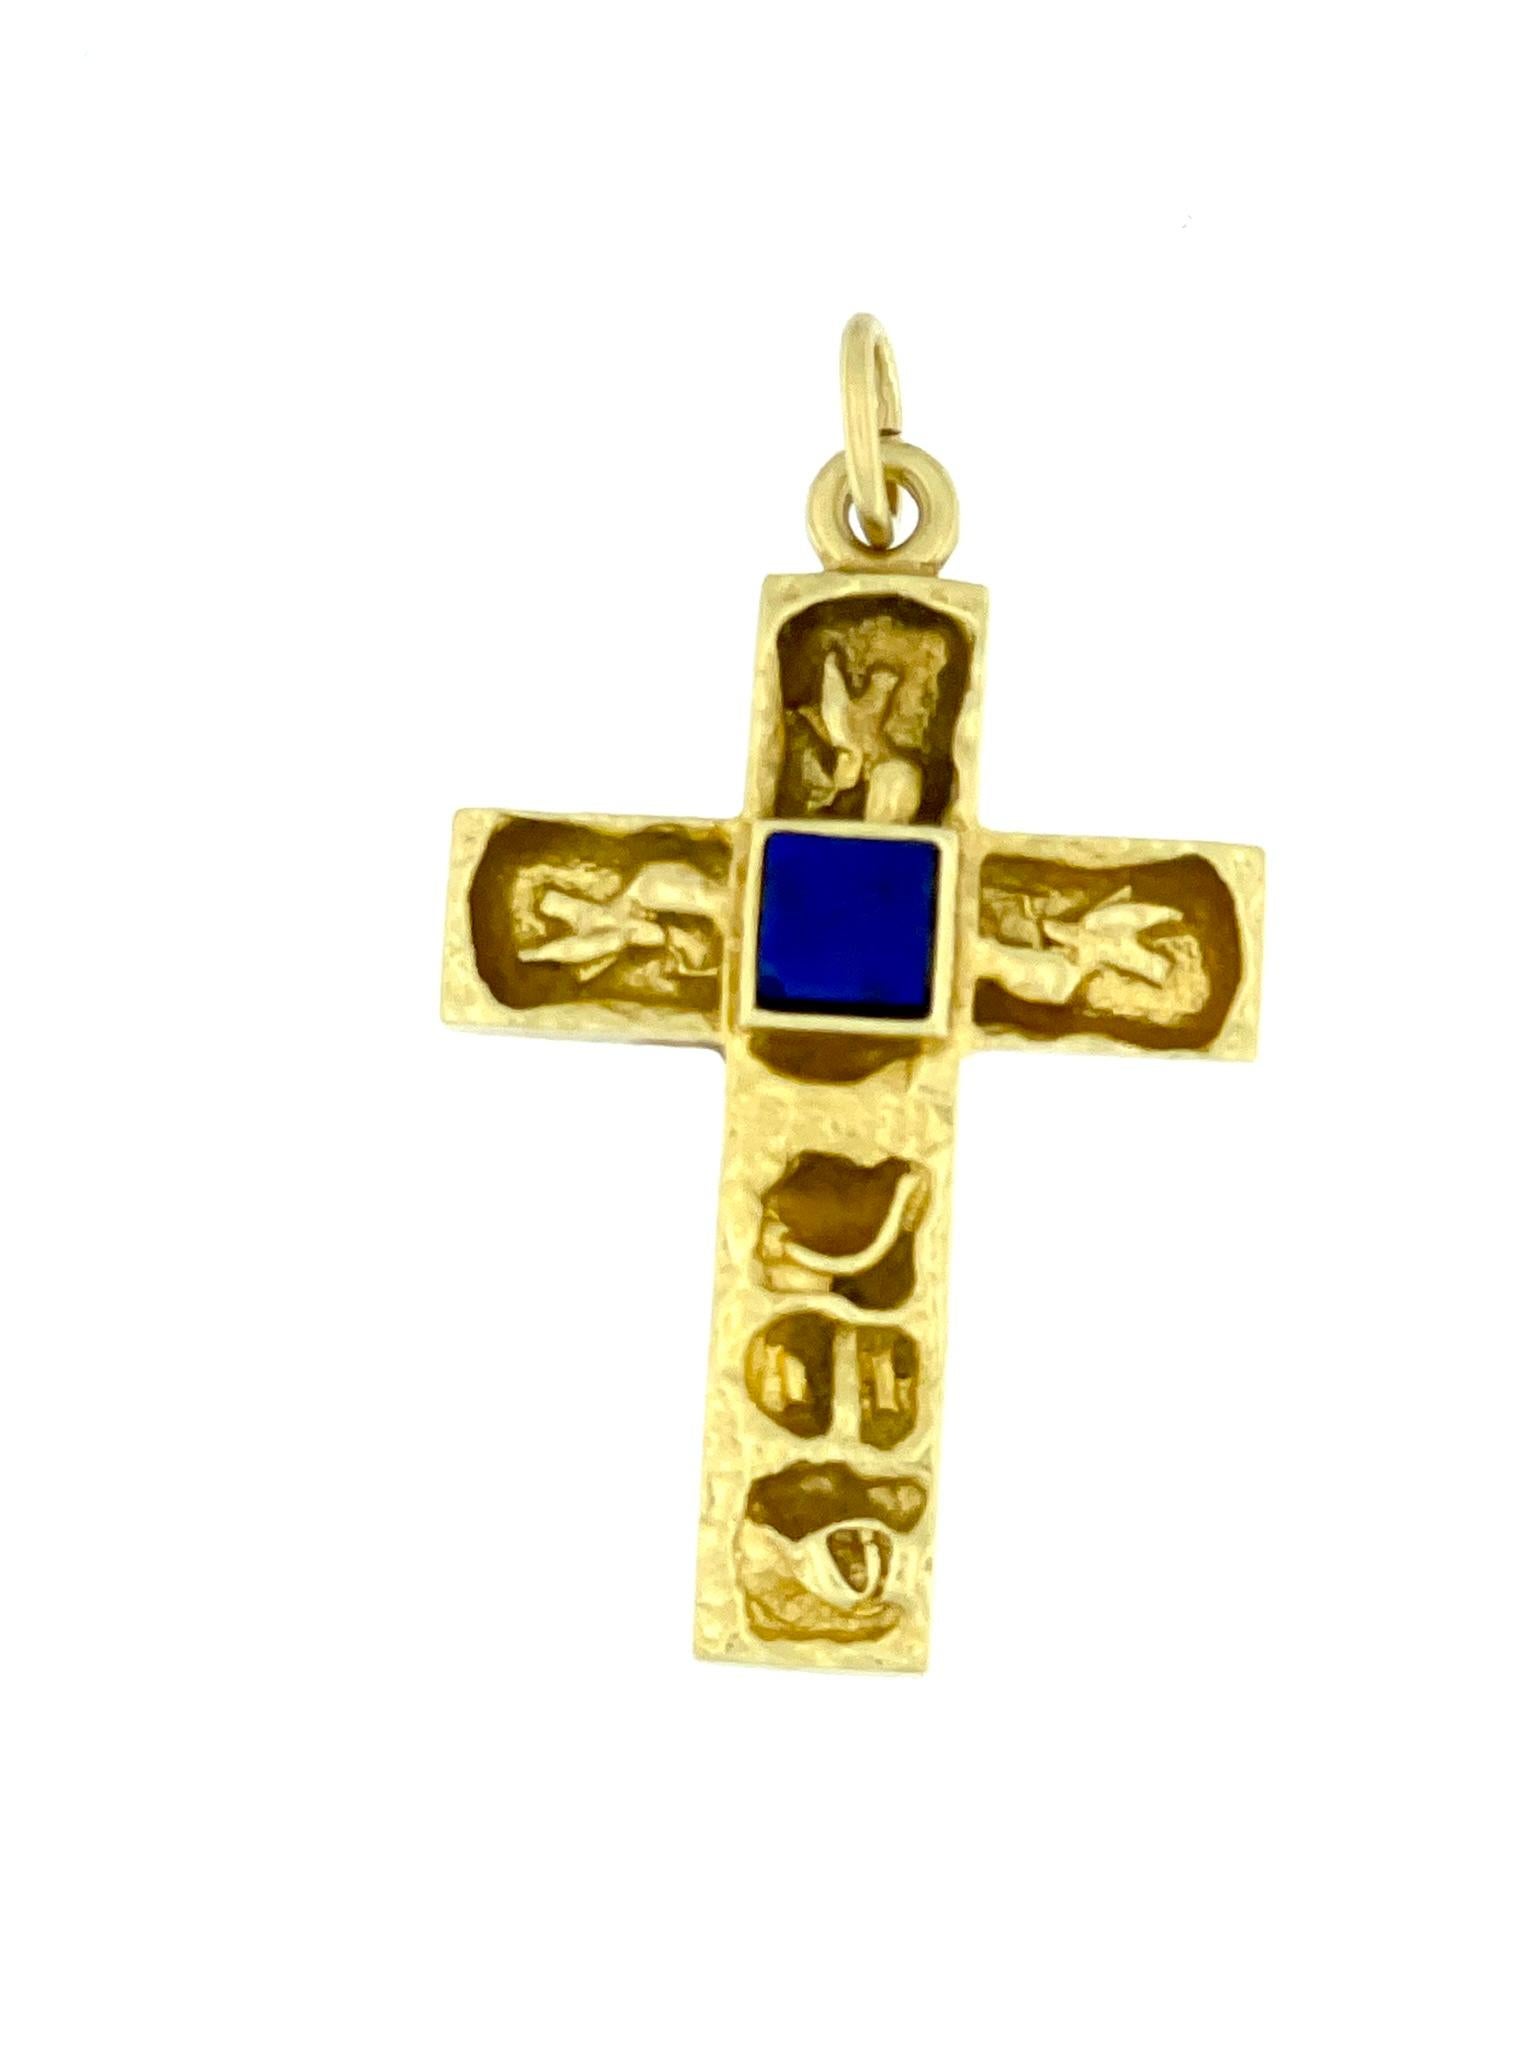 The Antique Italian 18kt Yellow Gold Cross with Lapis Lazuli is a timeless and exquisite piece of jewelry that reflects the craftsmanship and artistry of Italian design. The use of 18-karat yellow gold adds a touch of luxury and warmth to the cross.